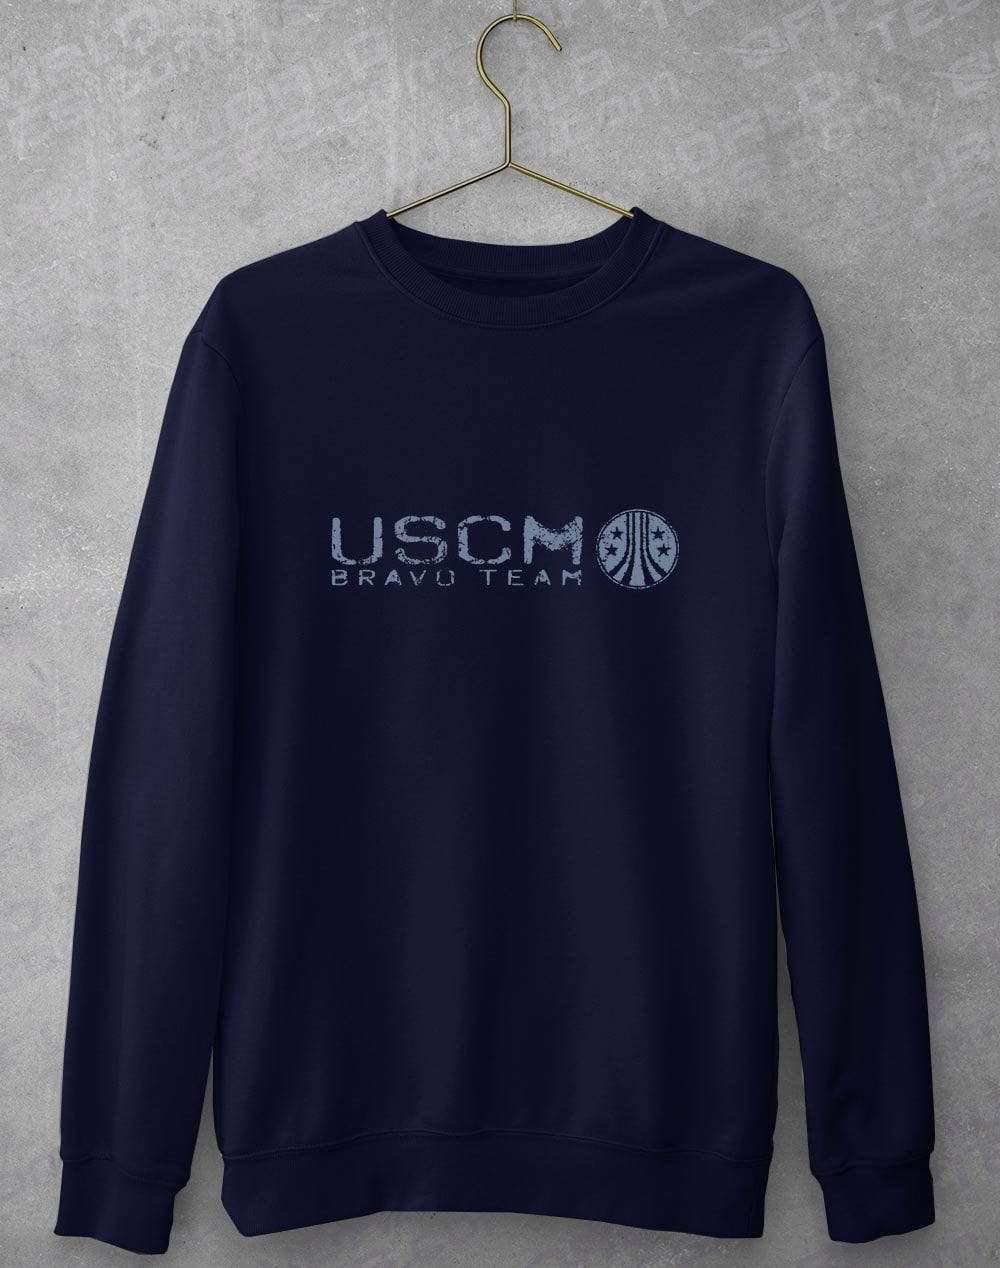 USCM United States Colonial Marines Sweatshirt S / Oxford Navy  - Off World Tees